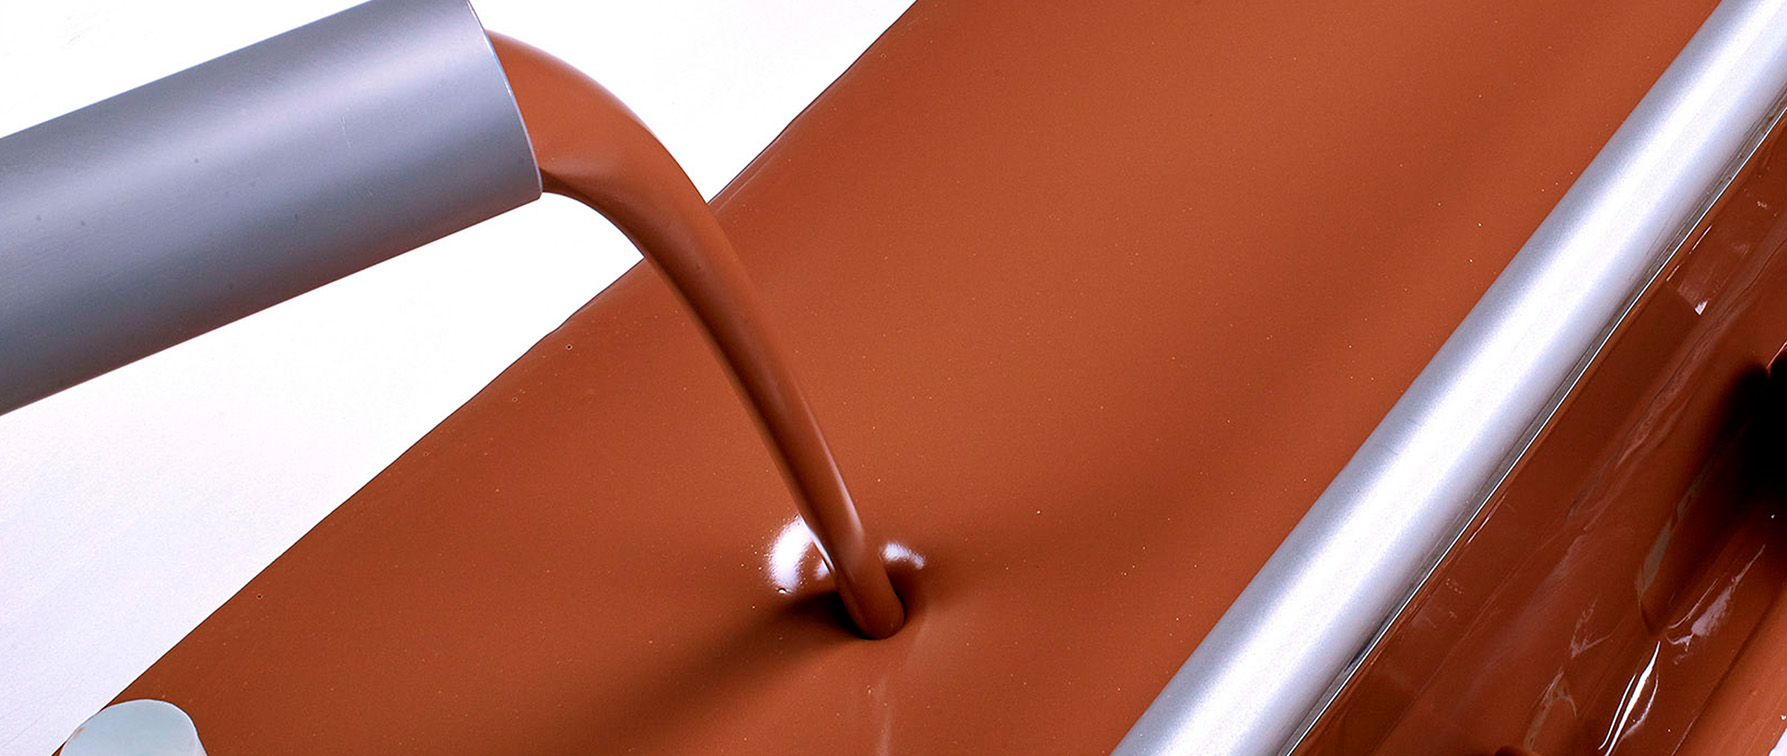 Liquid chocolate used to coat confectionery, pastries and other bakery products.